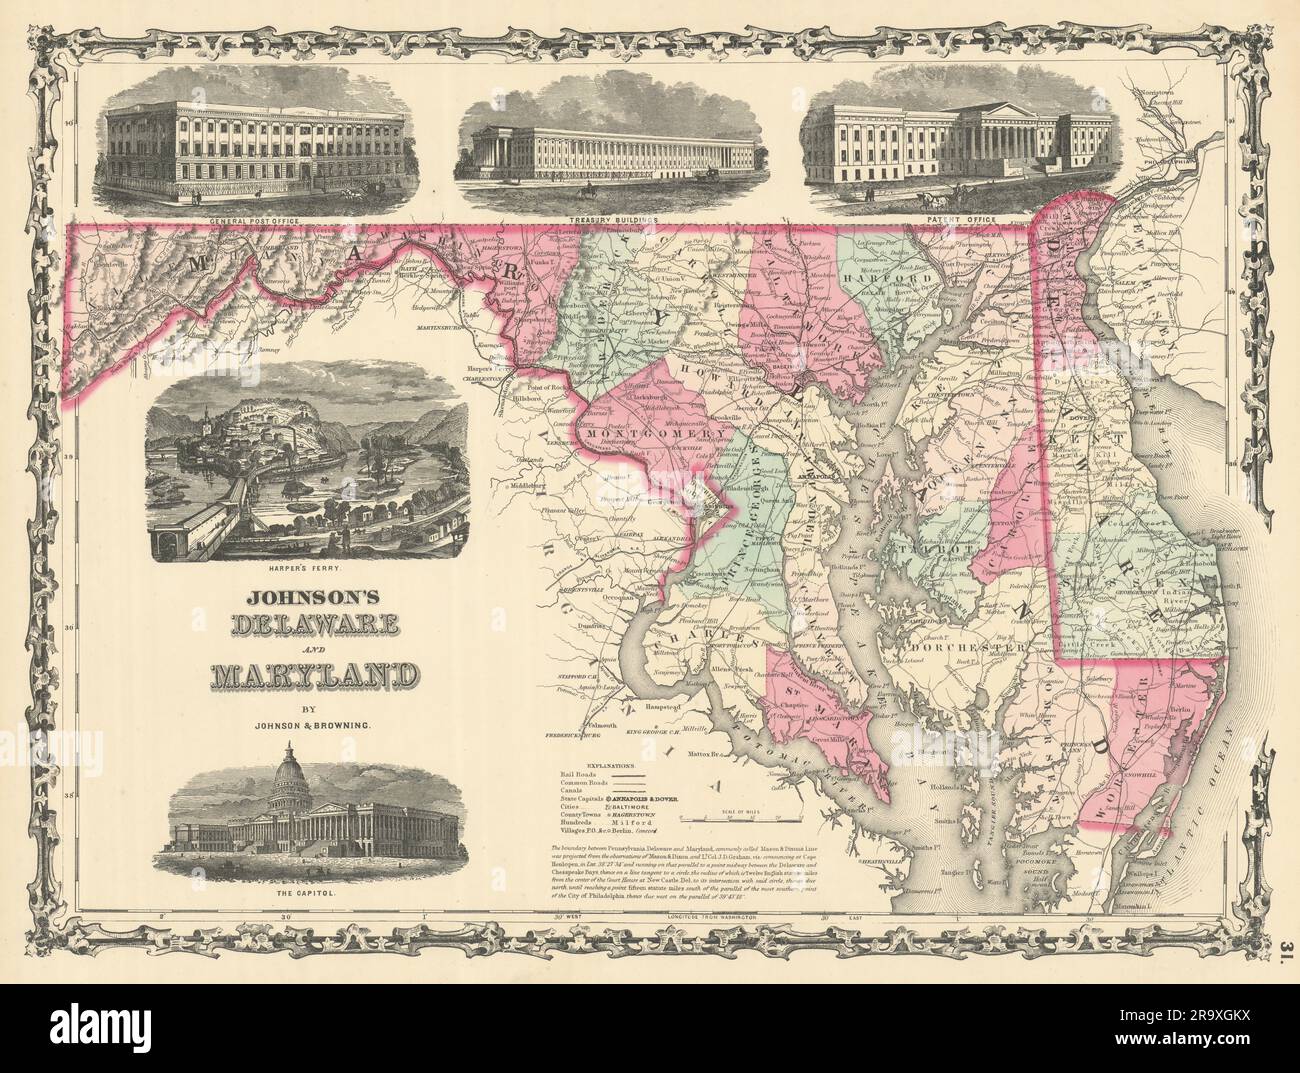 Johnson's Delaware & Maryland. District of Columbia. Counties 1861 old map Stock Photo